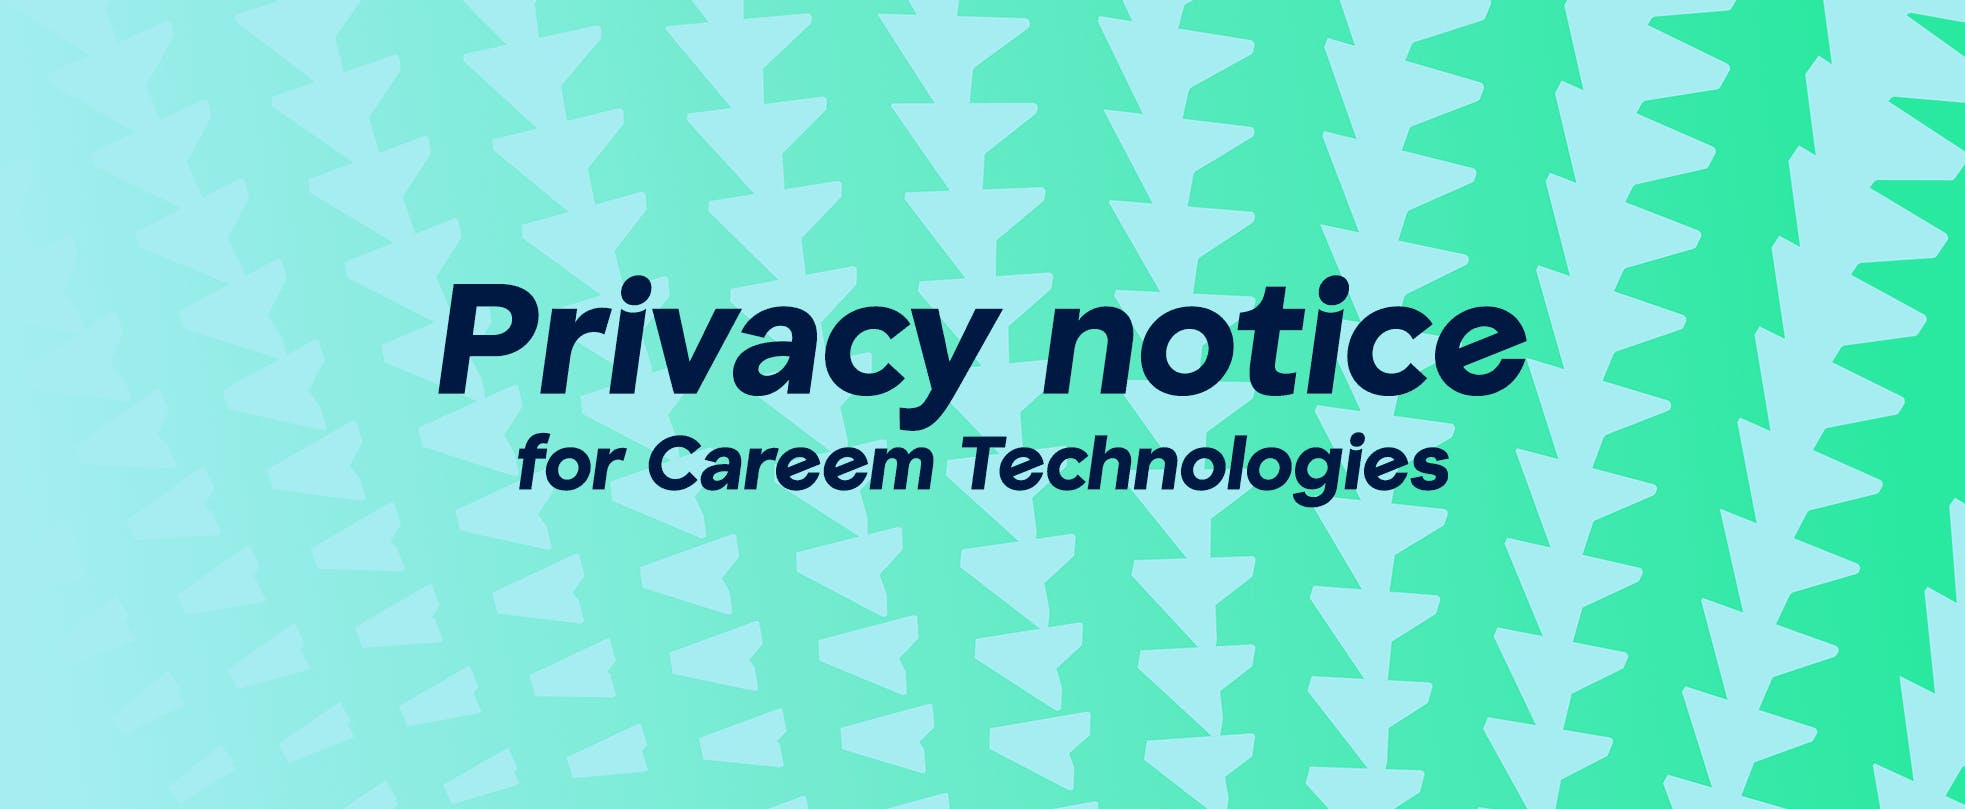 Privacy notices for Careem technologies 